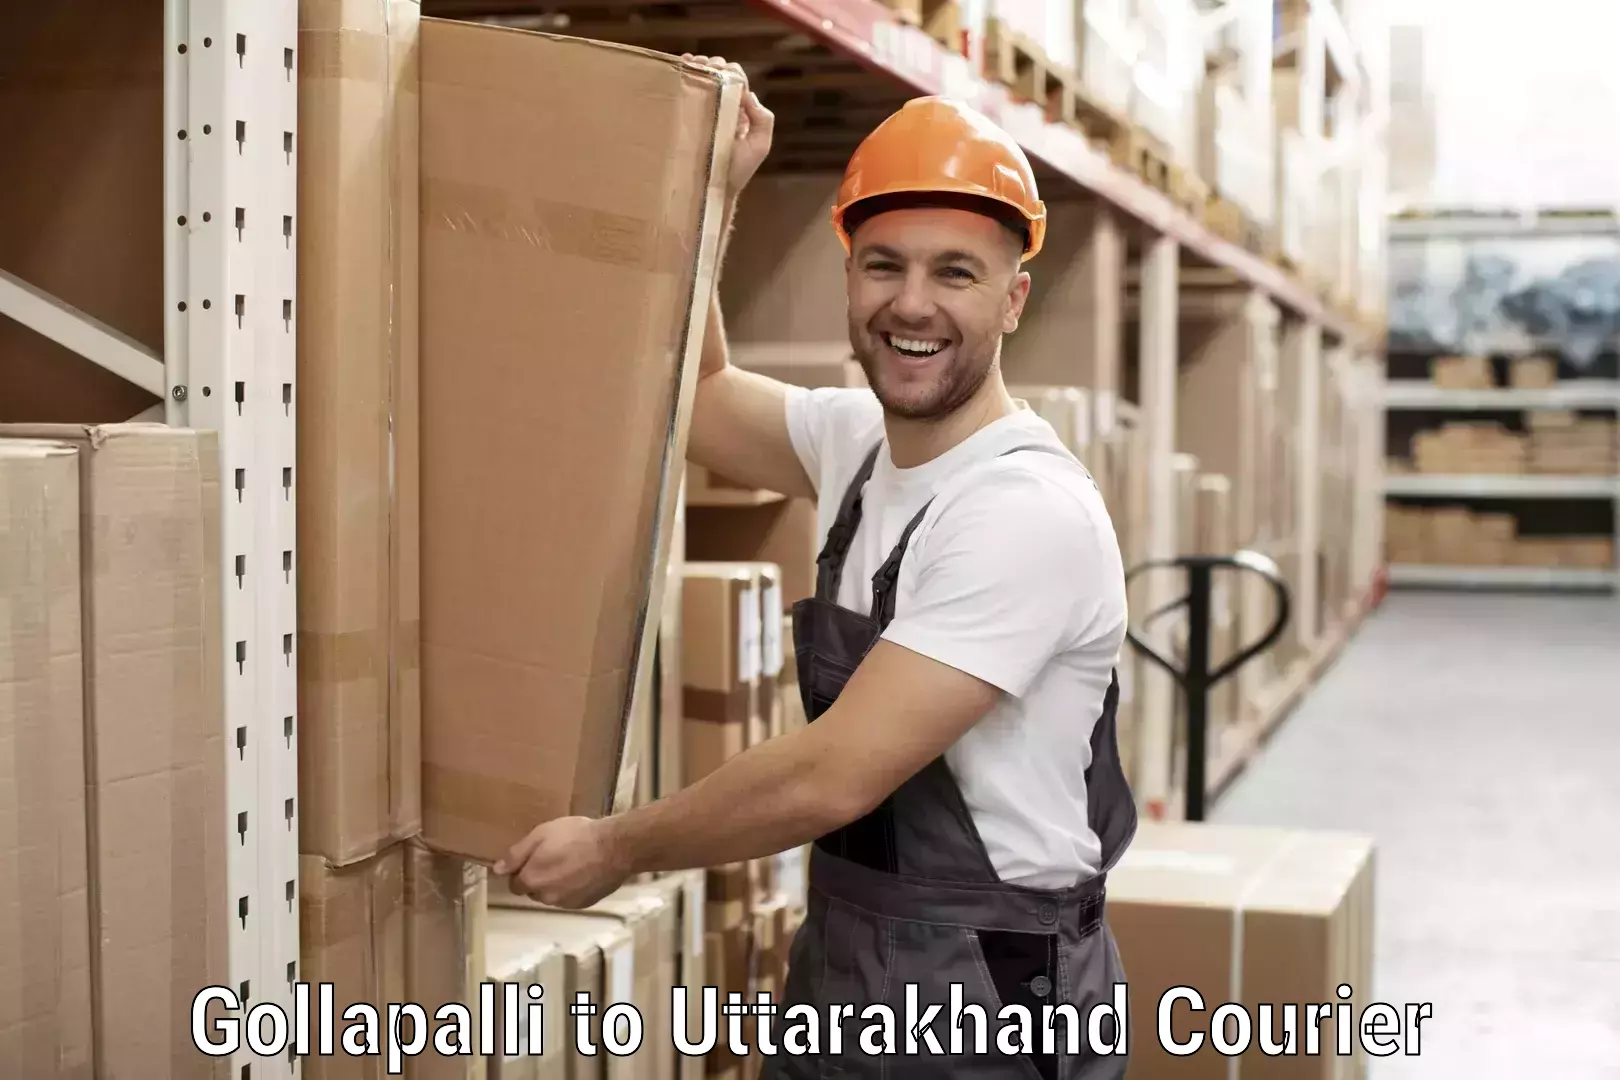 Quality courier partnerships Gollapalli to Rishikesh